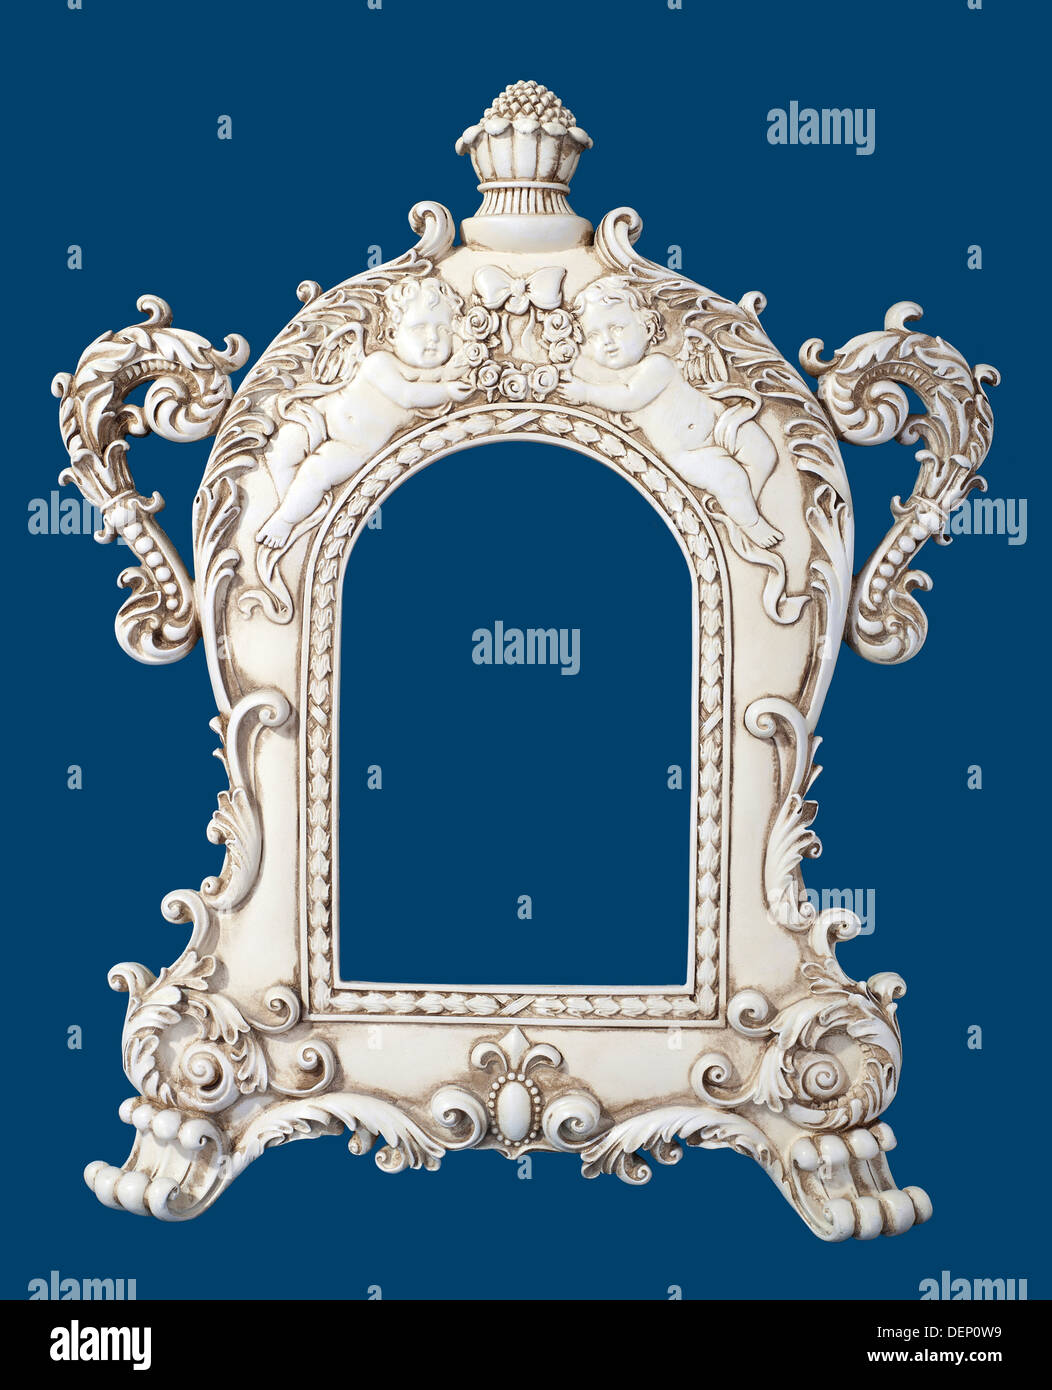 Frame - decorated frame with angels and children on the blue background Stock Photo